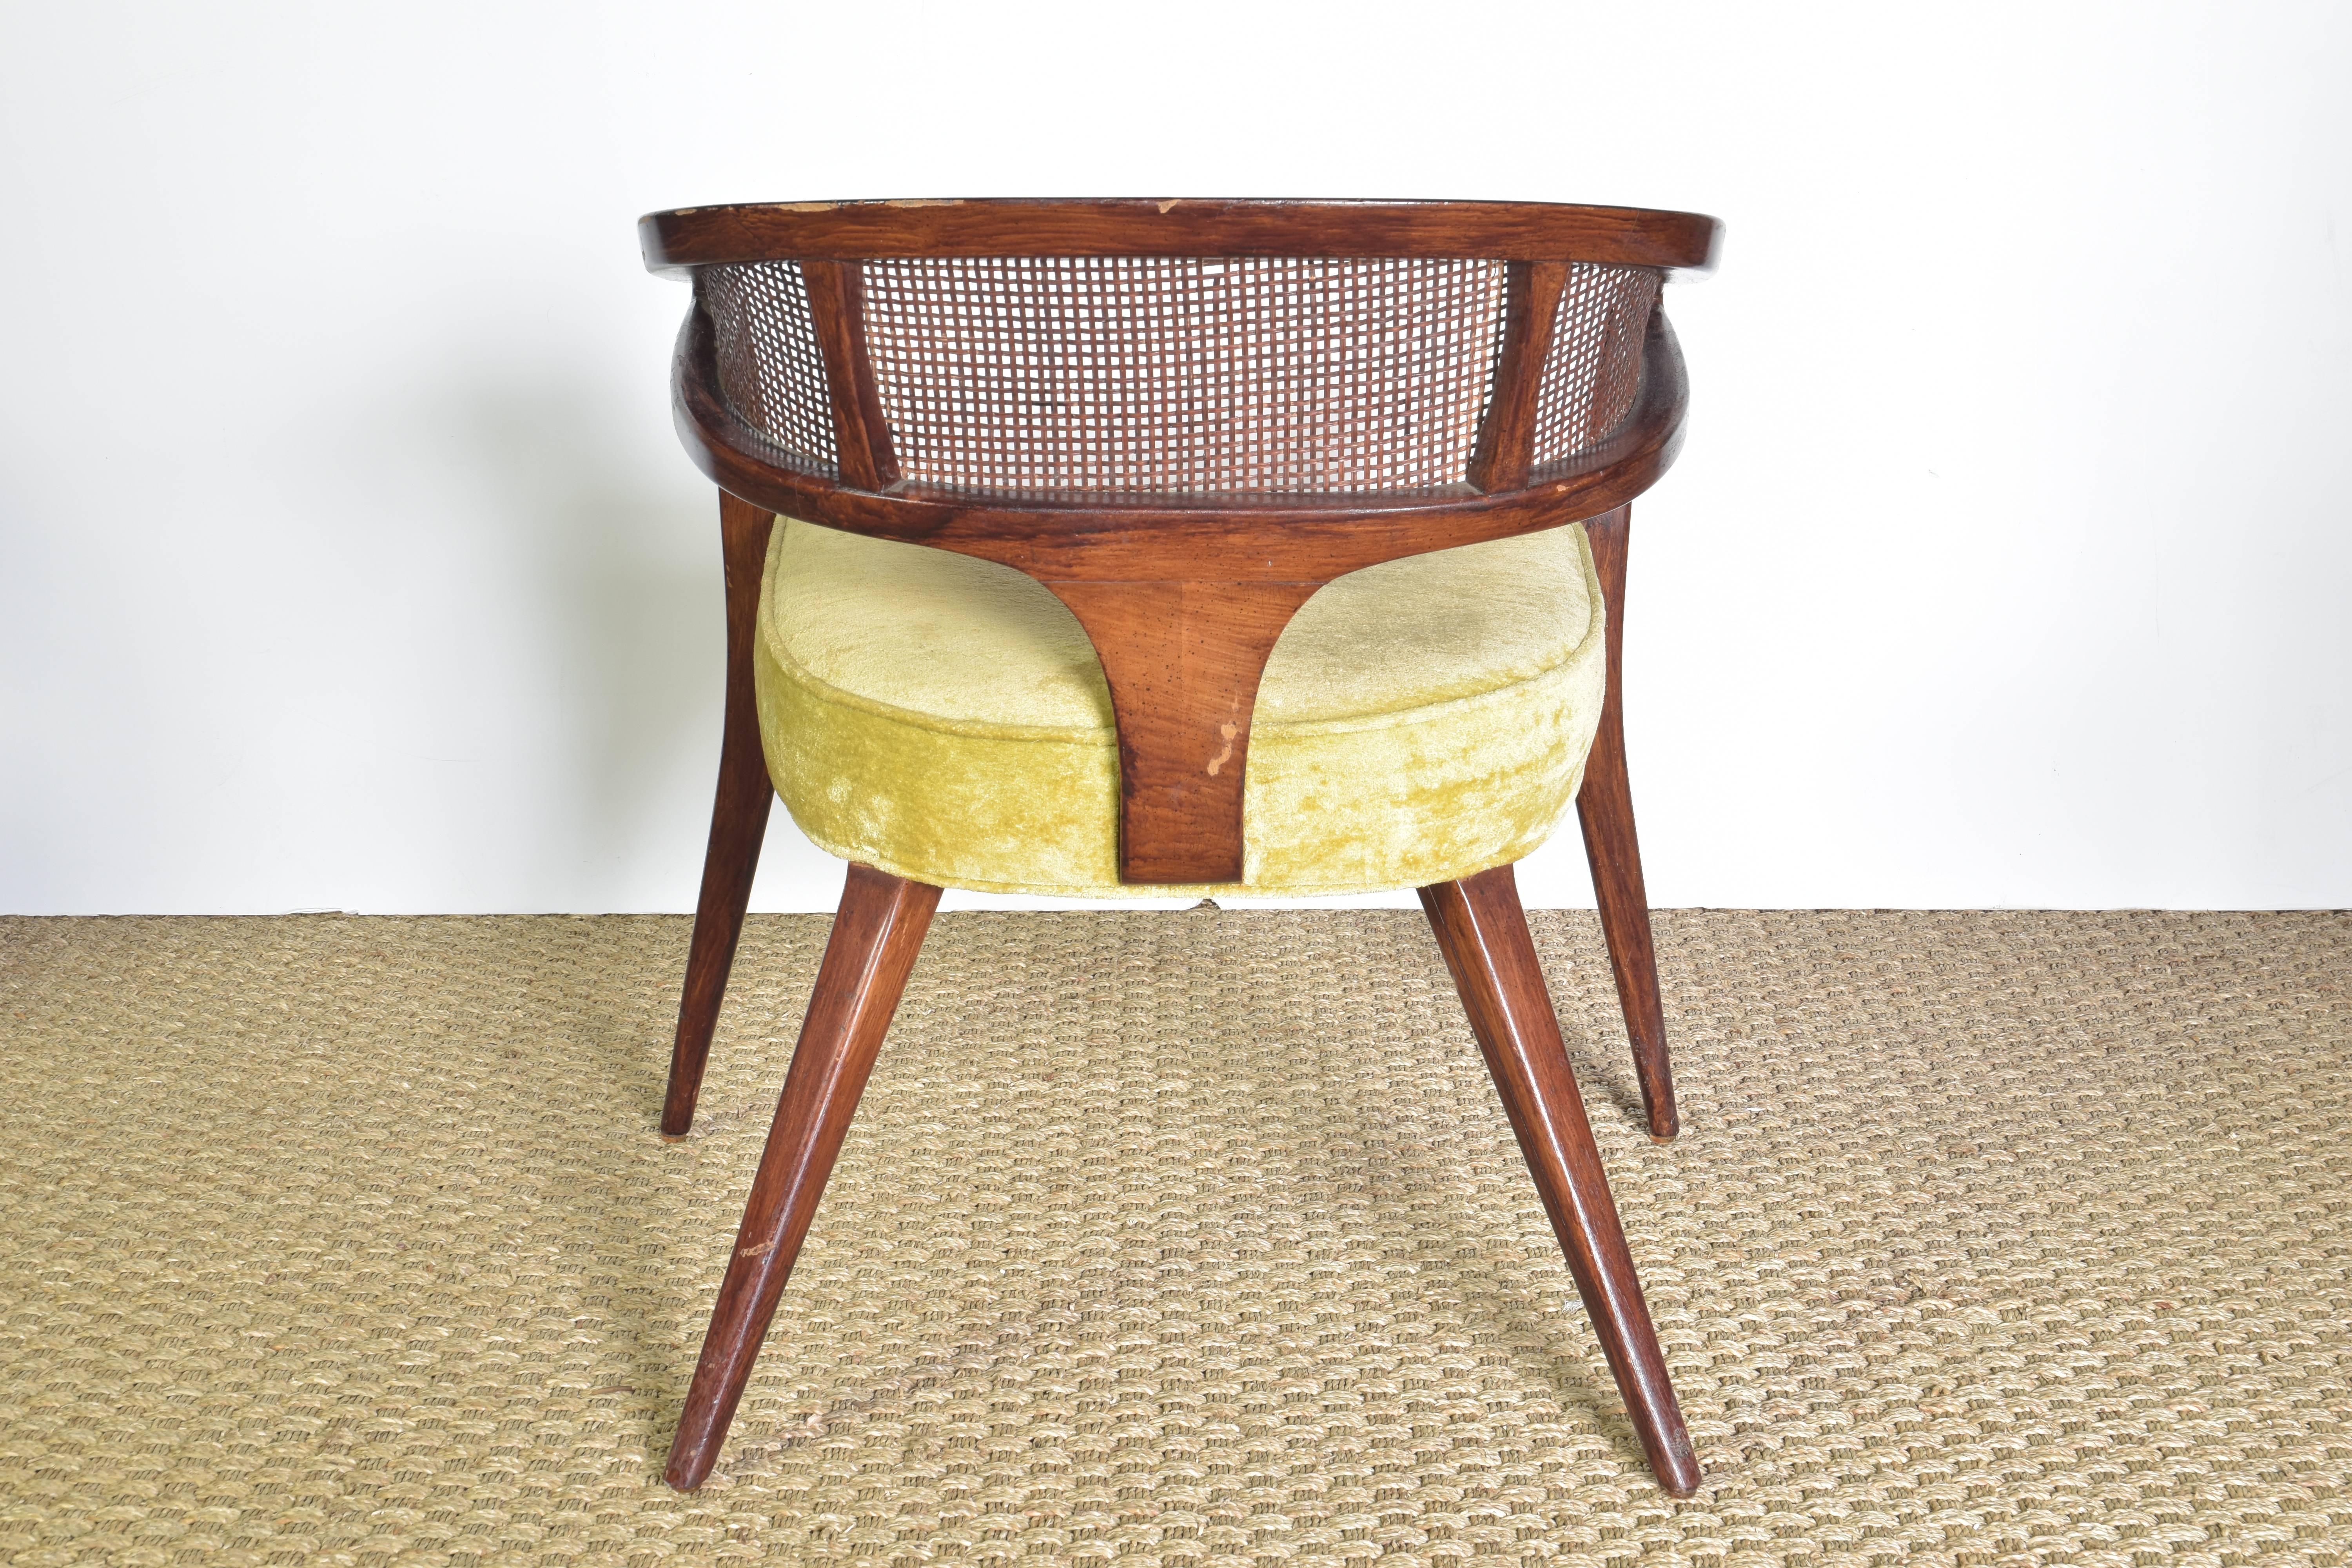 Chic pair of Midcentury chairs with curved backs and original caning.
 